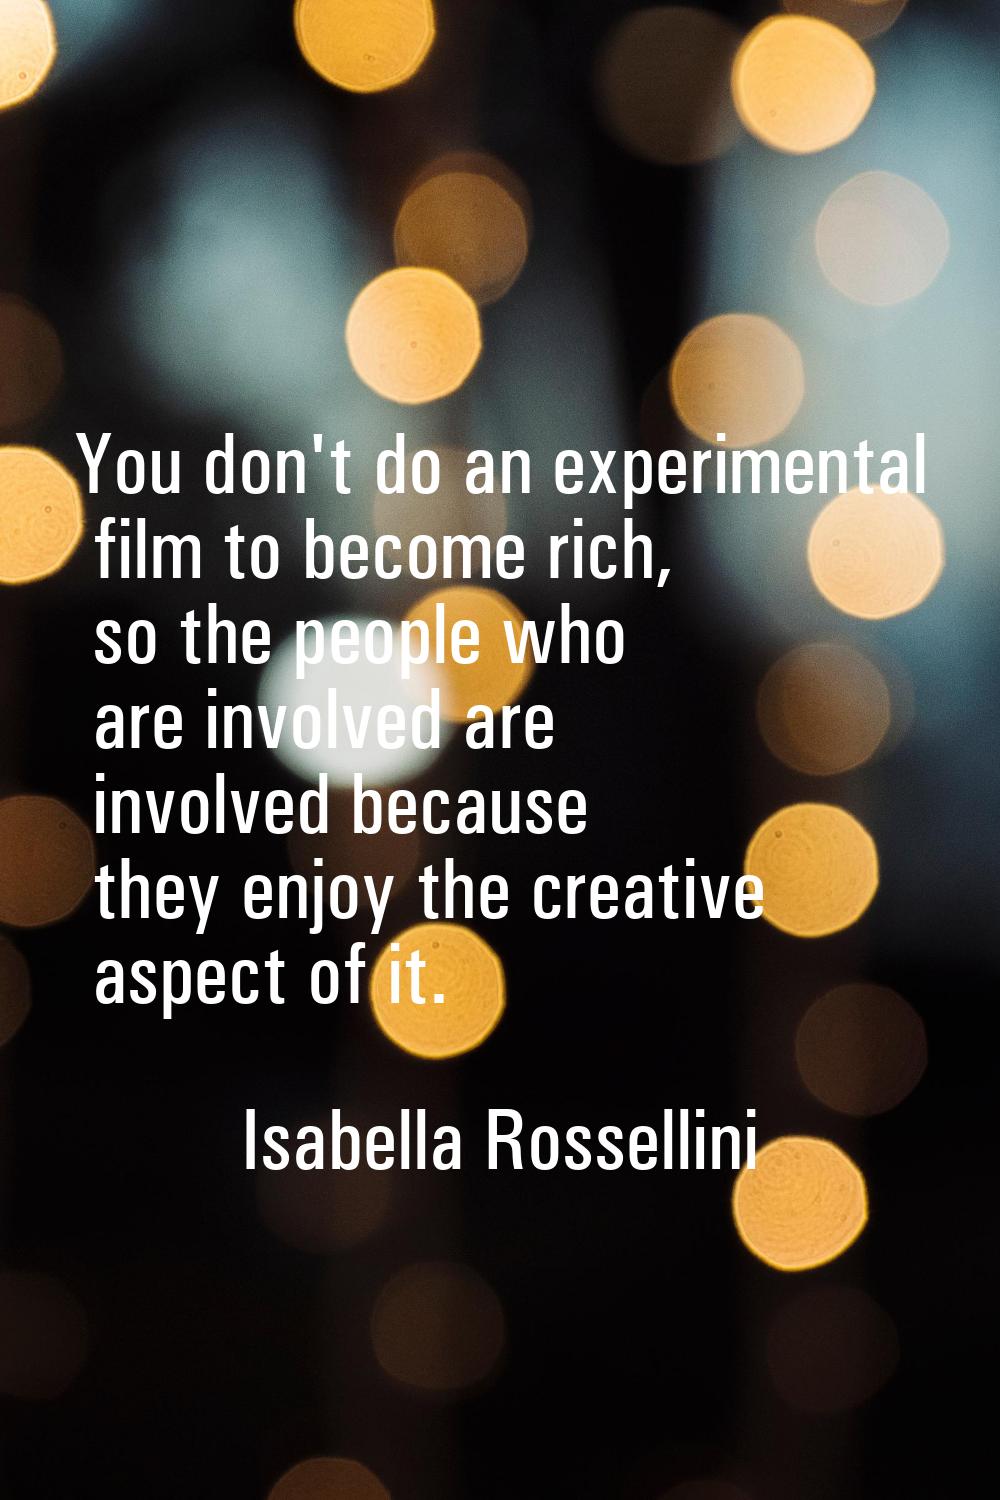 You don't do an experimental film to become rich, so the people who are involved are involved becau